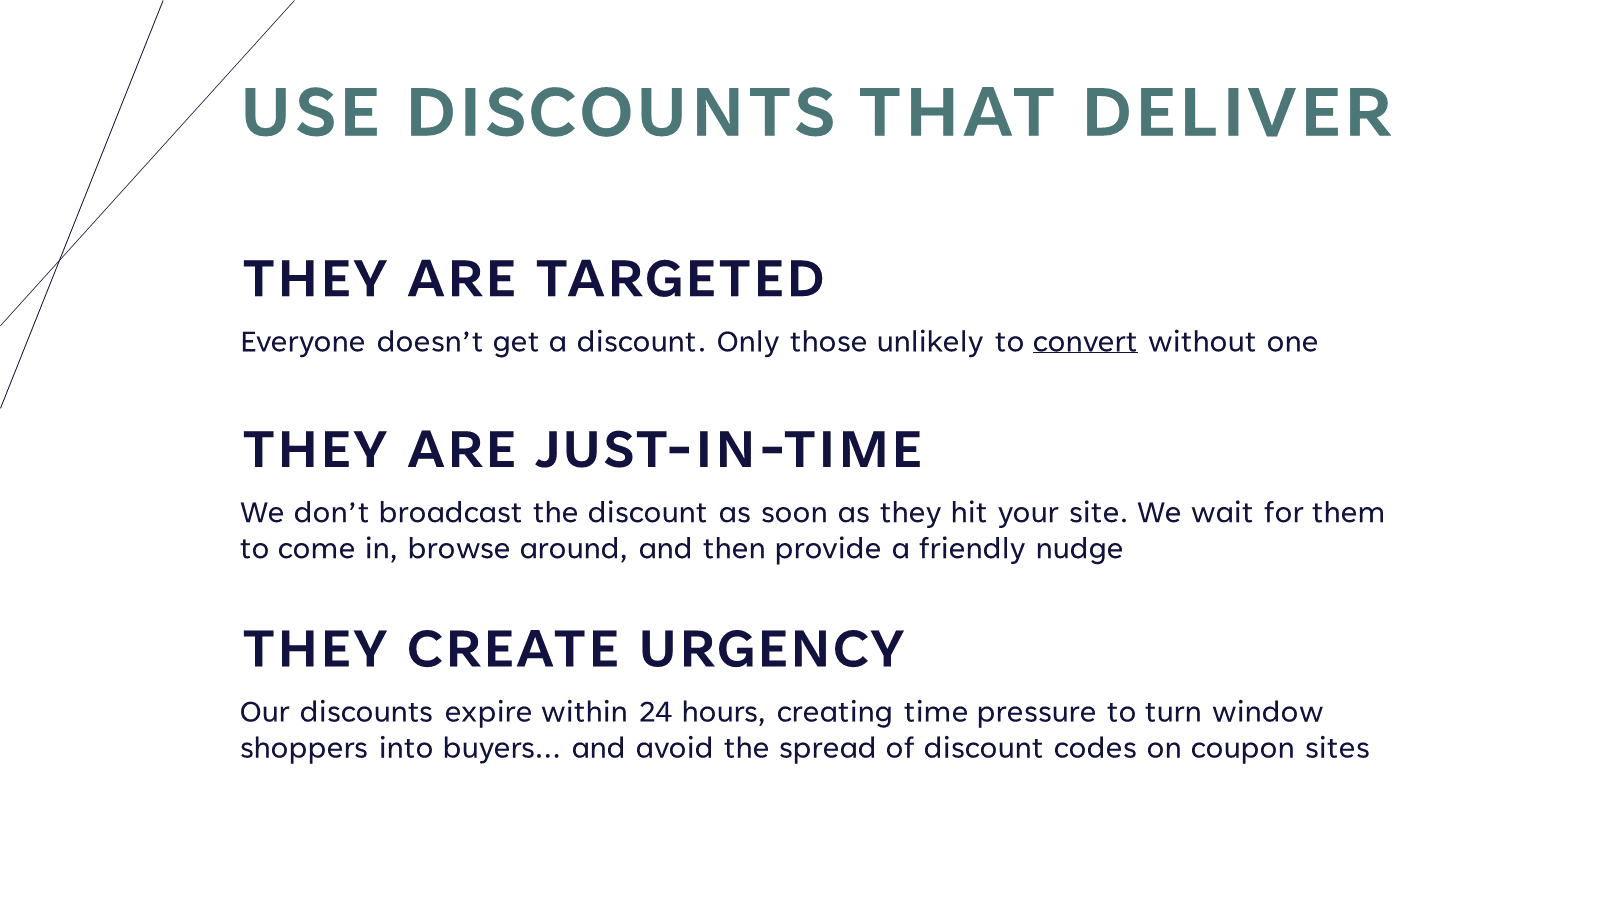 Use Discounts That Deliver